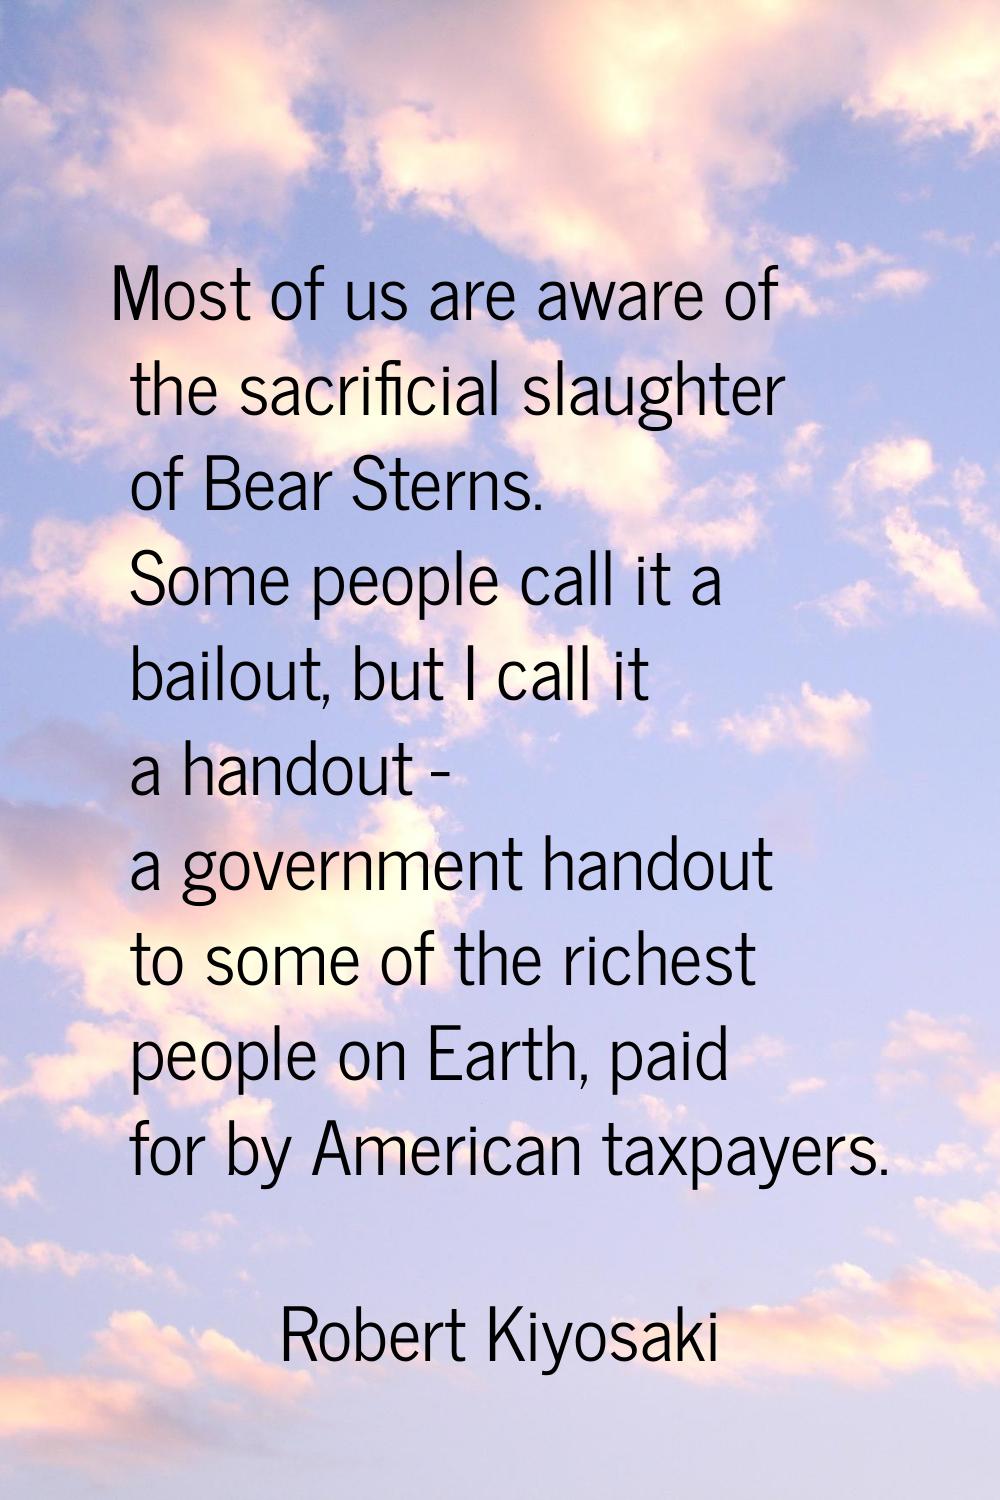 Most of us are aware of the sacrificial slaughter of Bear Sterns. Some people call it a bailout, bu